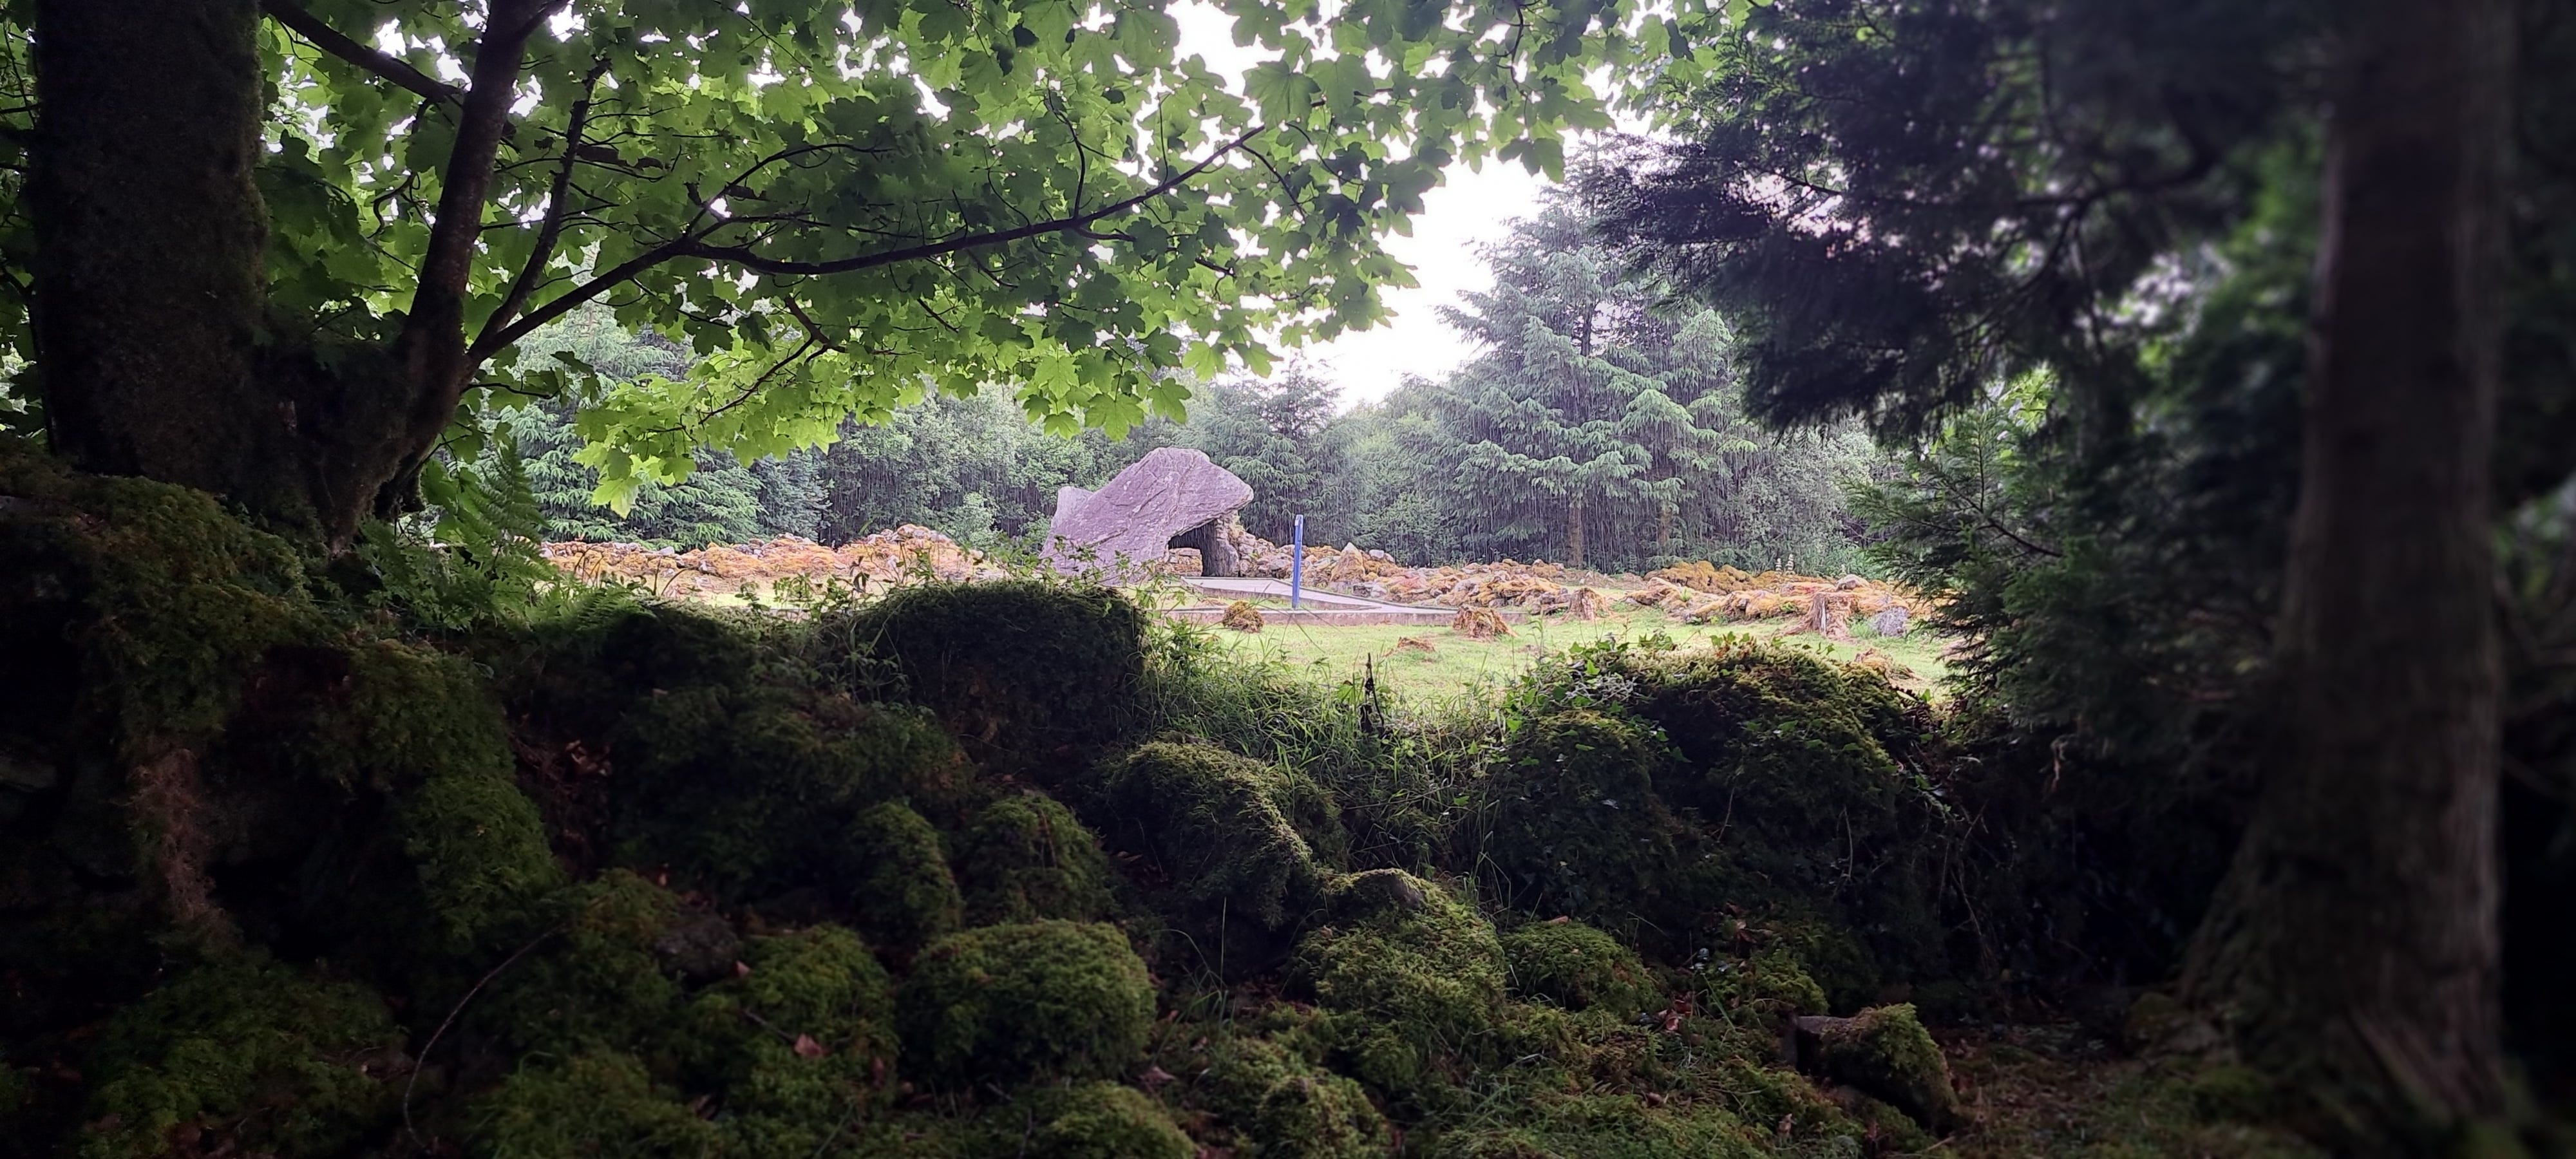 The Calf's Dolmen glimpsed above a mossy tumbled stone wall in a gap between overgrown tree branches.